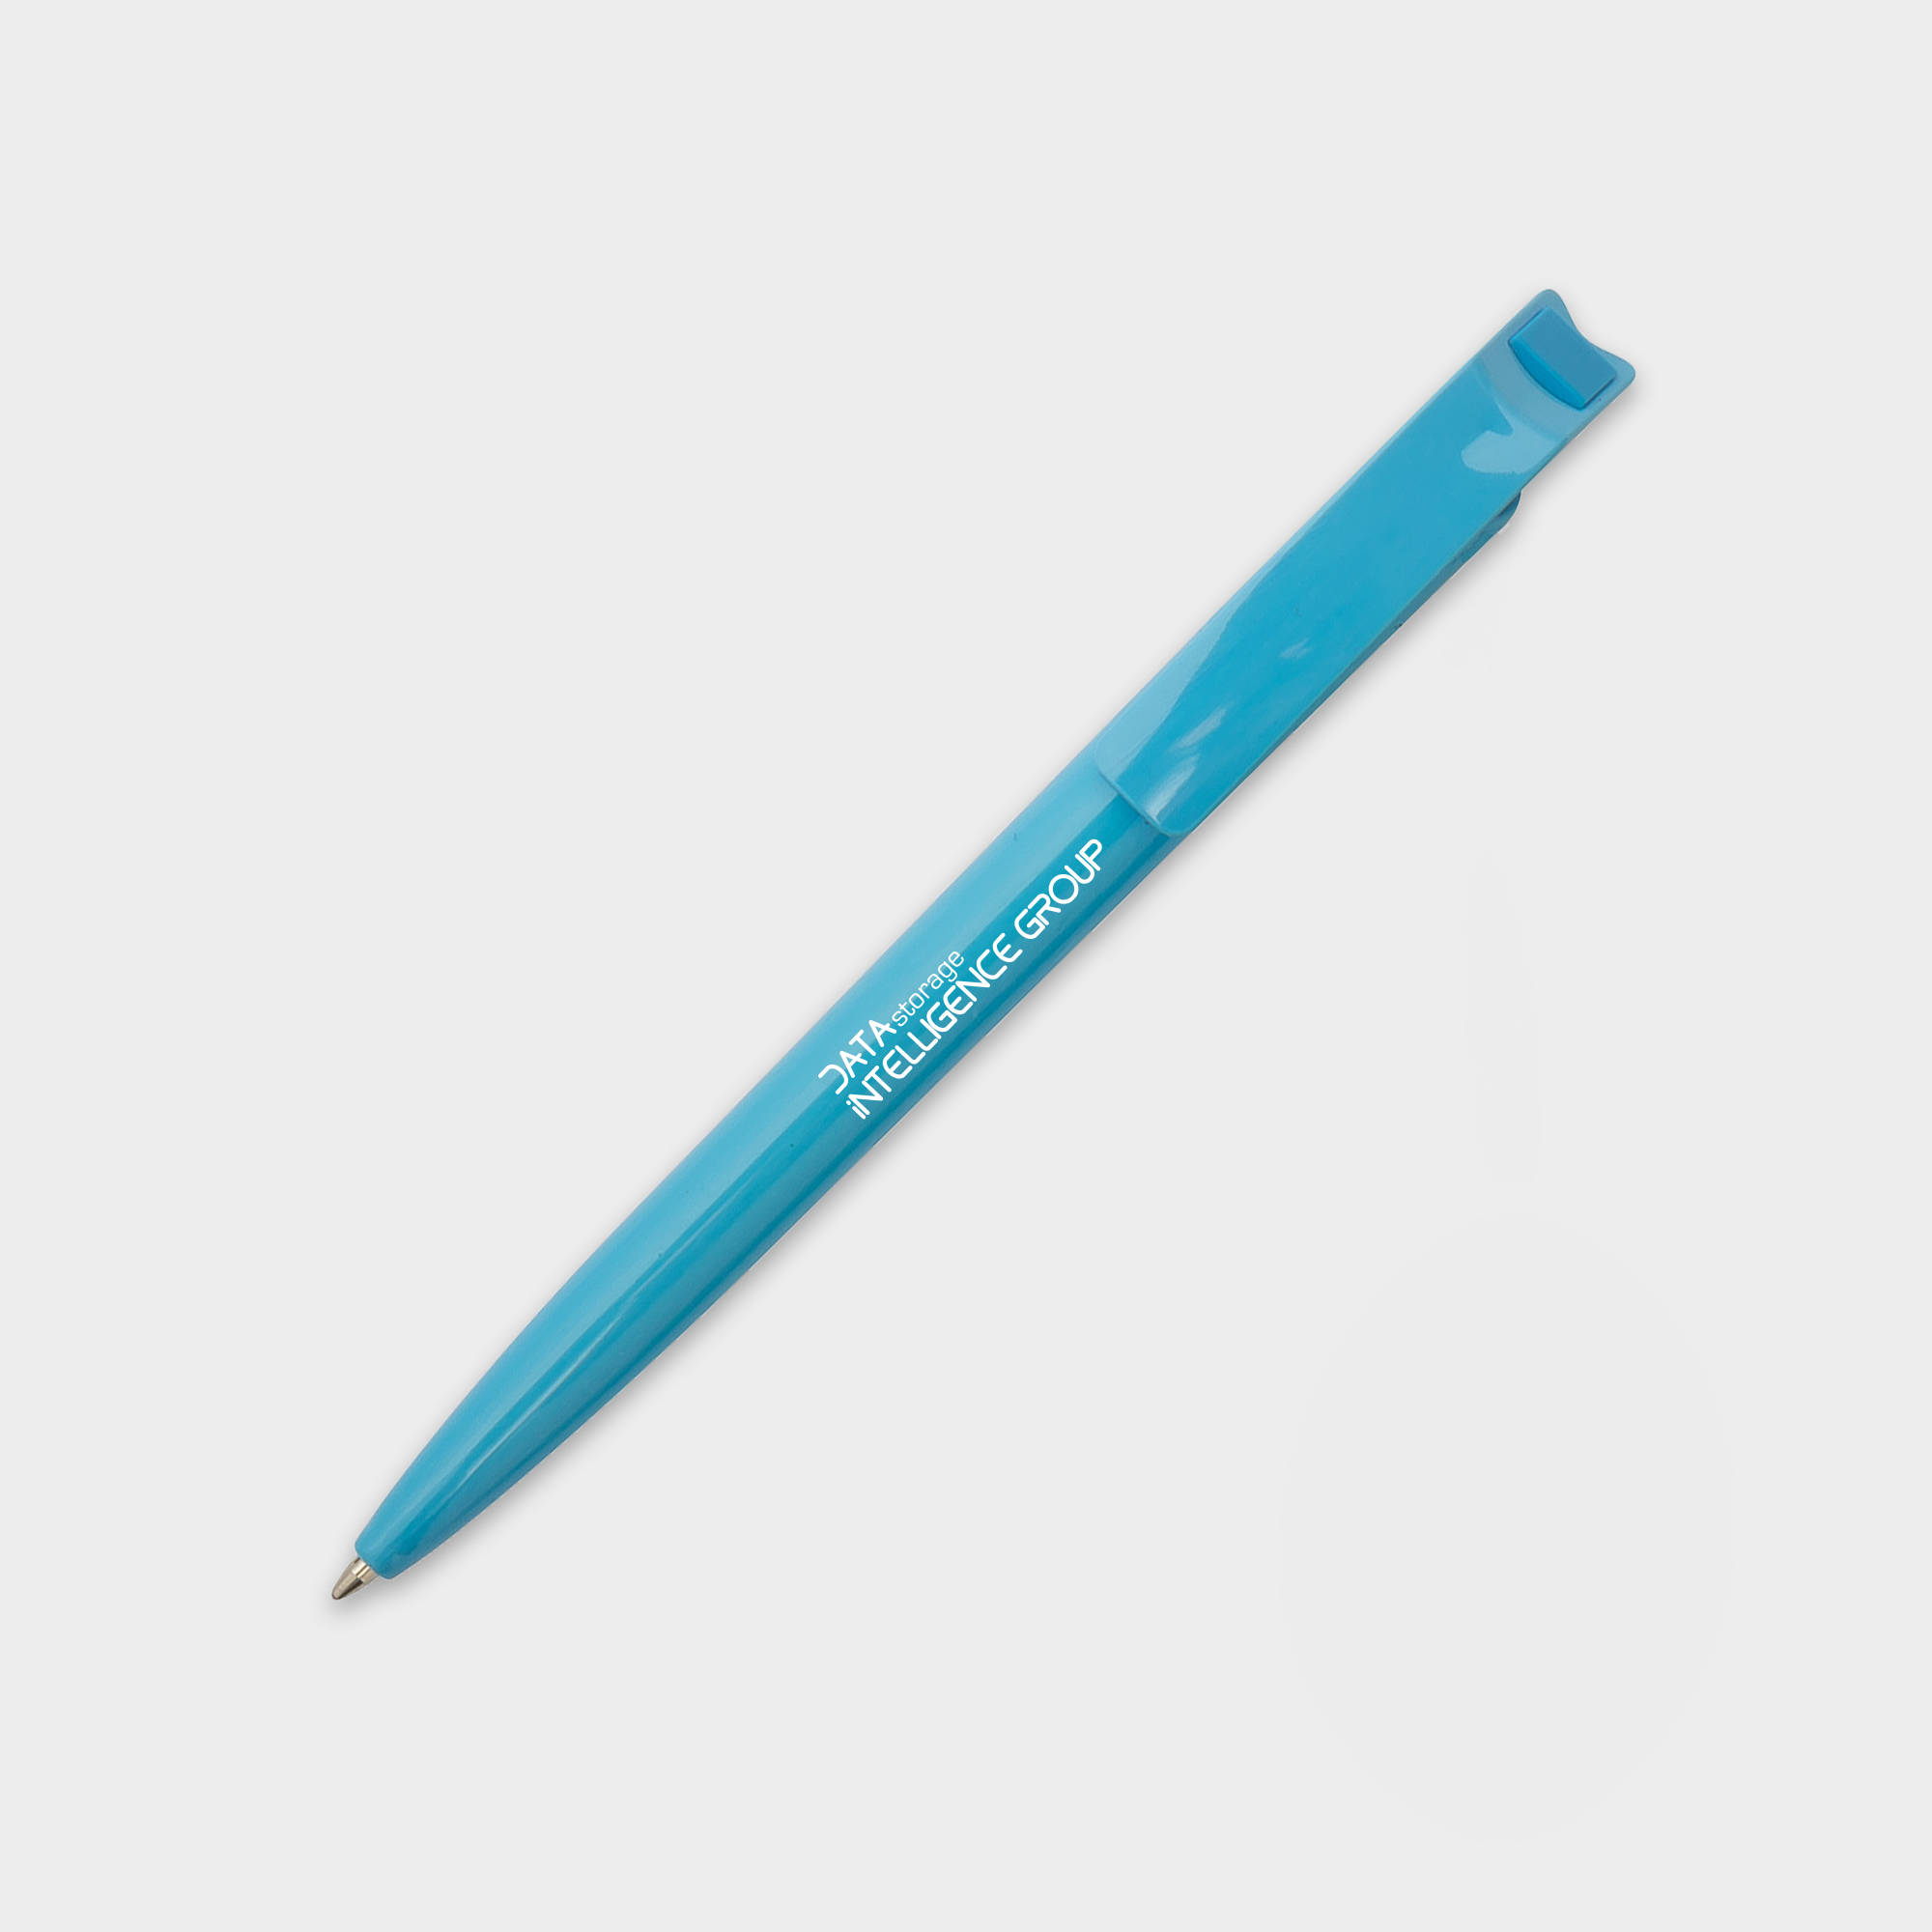 The Green & Good Litani Pen. An eco-friendly and high-quality pen made from recycled plastic bottles (rPET) with black ink refills and a solid colour body. Made in the EU and available in a variety of colours. Light Blue